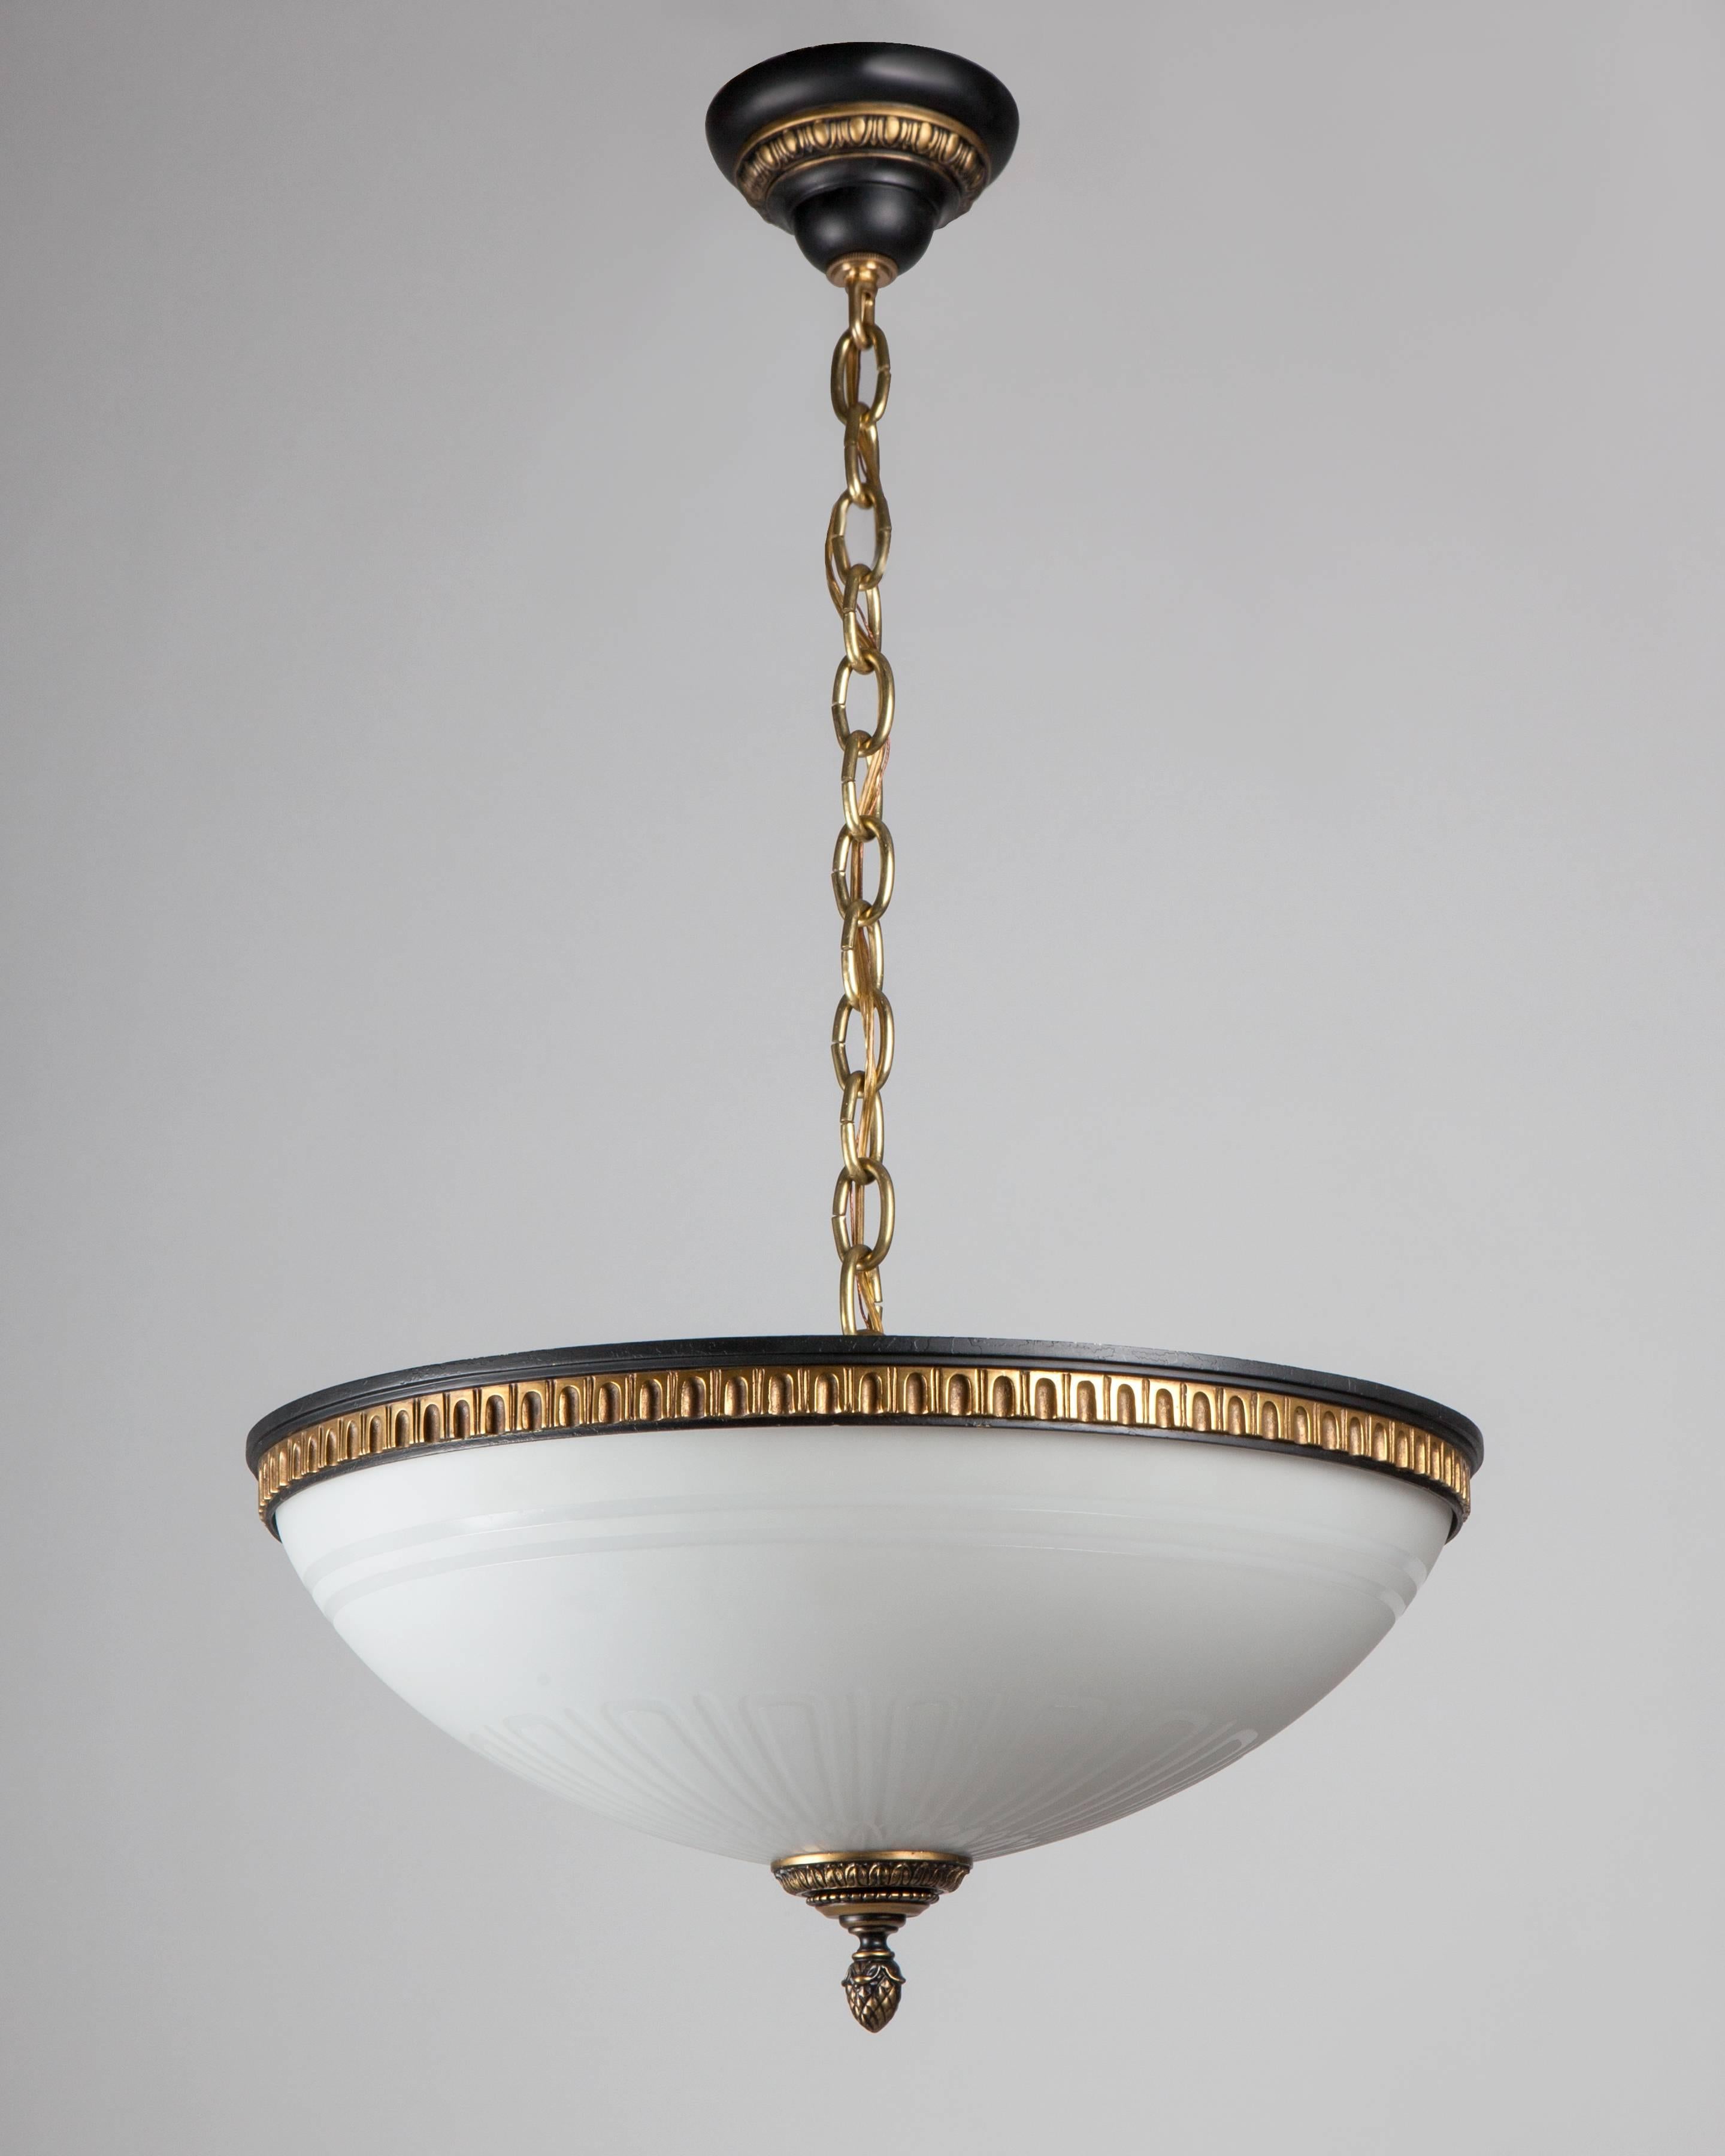 AHL4087
An antique inverted dome chandelier with an acid-etched white lens held by cast bronze fittings in their original gilded and black lacquered finish. Attributed to the New York maker E. F. Caldwell Co. Due to the antique nature of this